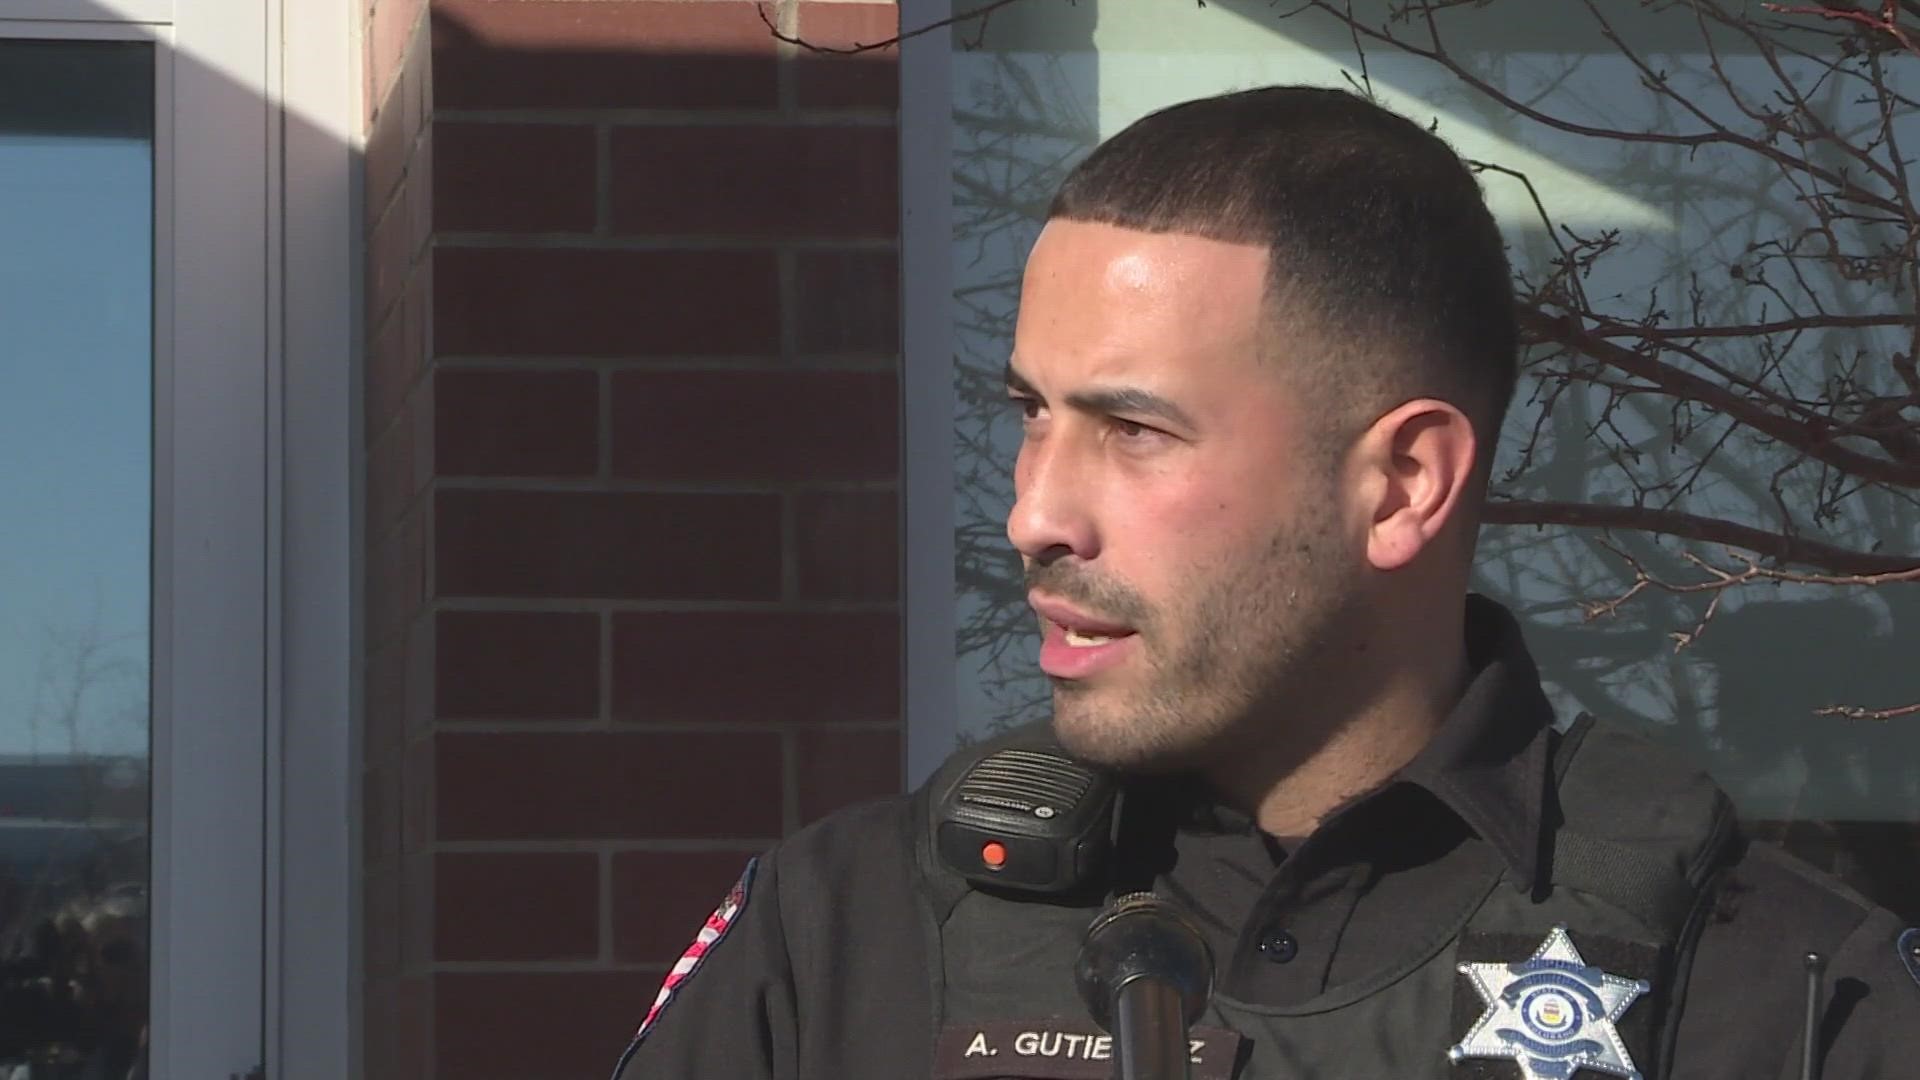 Deputy Armando Gutierrez was one of the first on scene of an apartment fire Wednesday morning near South Parker Road and Mississippi Avenue.